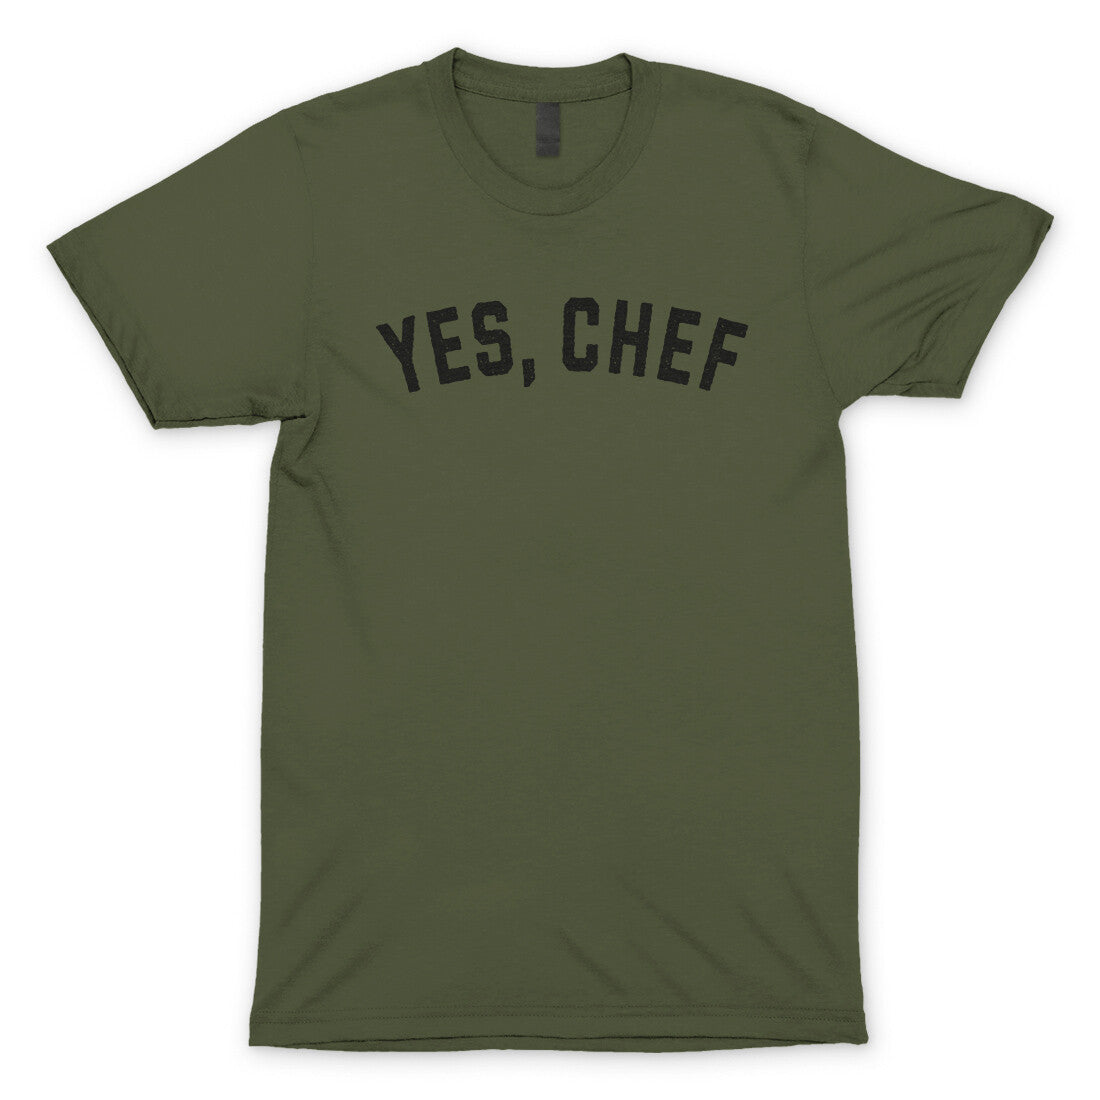 Yes Chef in Military Green Color